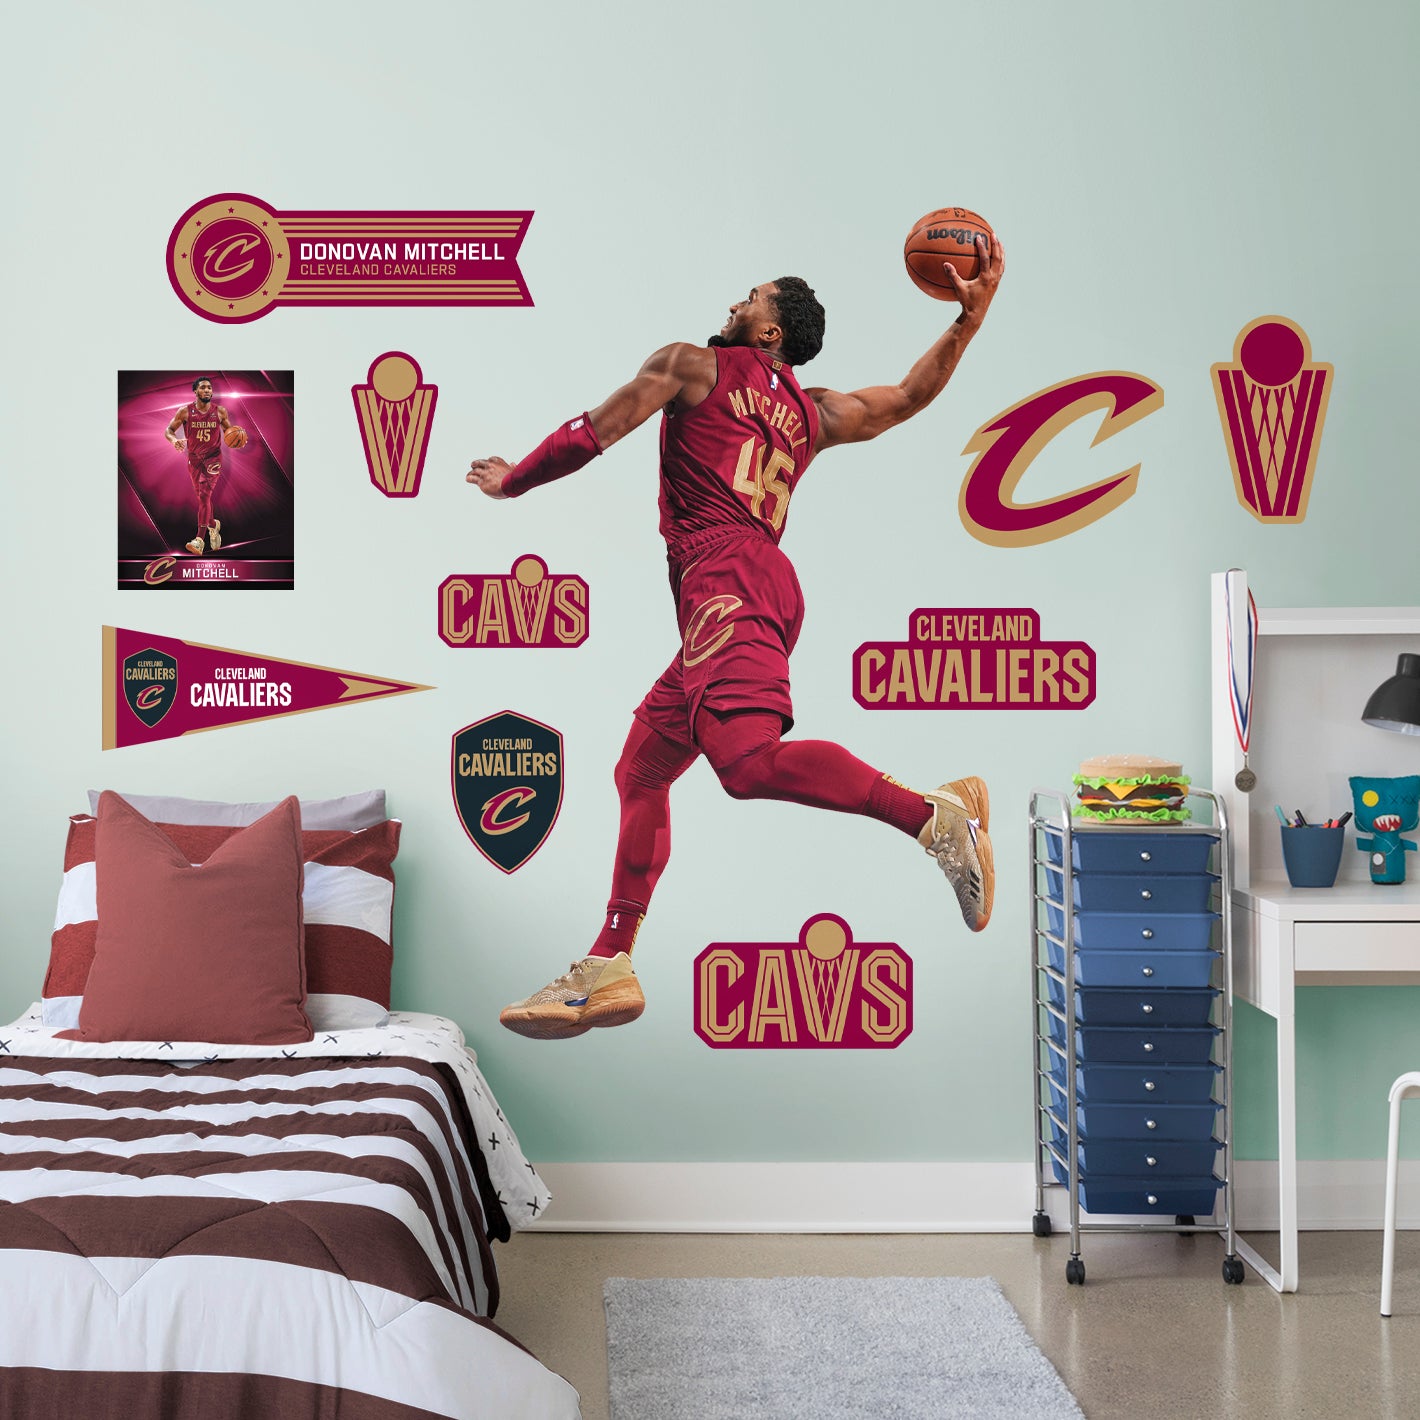 Donovan Mitchell Slam Dunk (Cavs) Poster for Sale by RatTrapTees